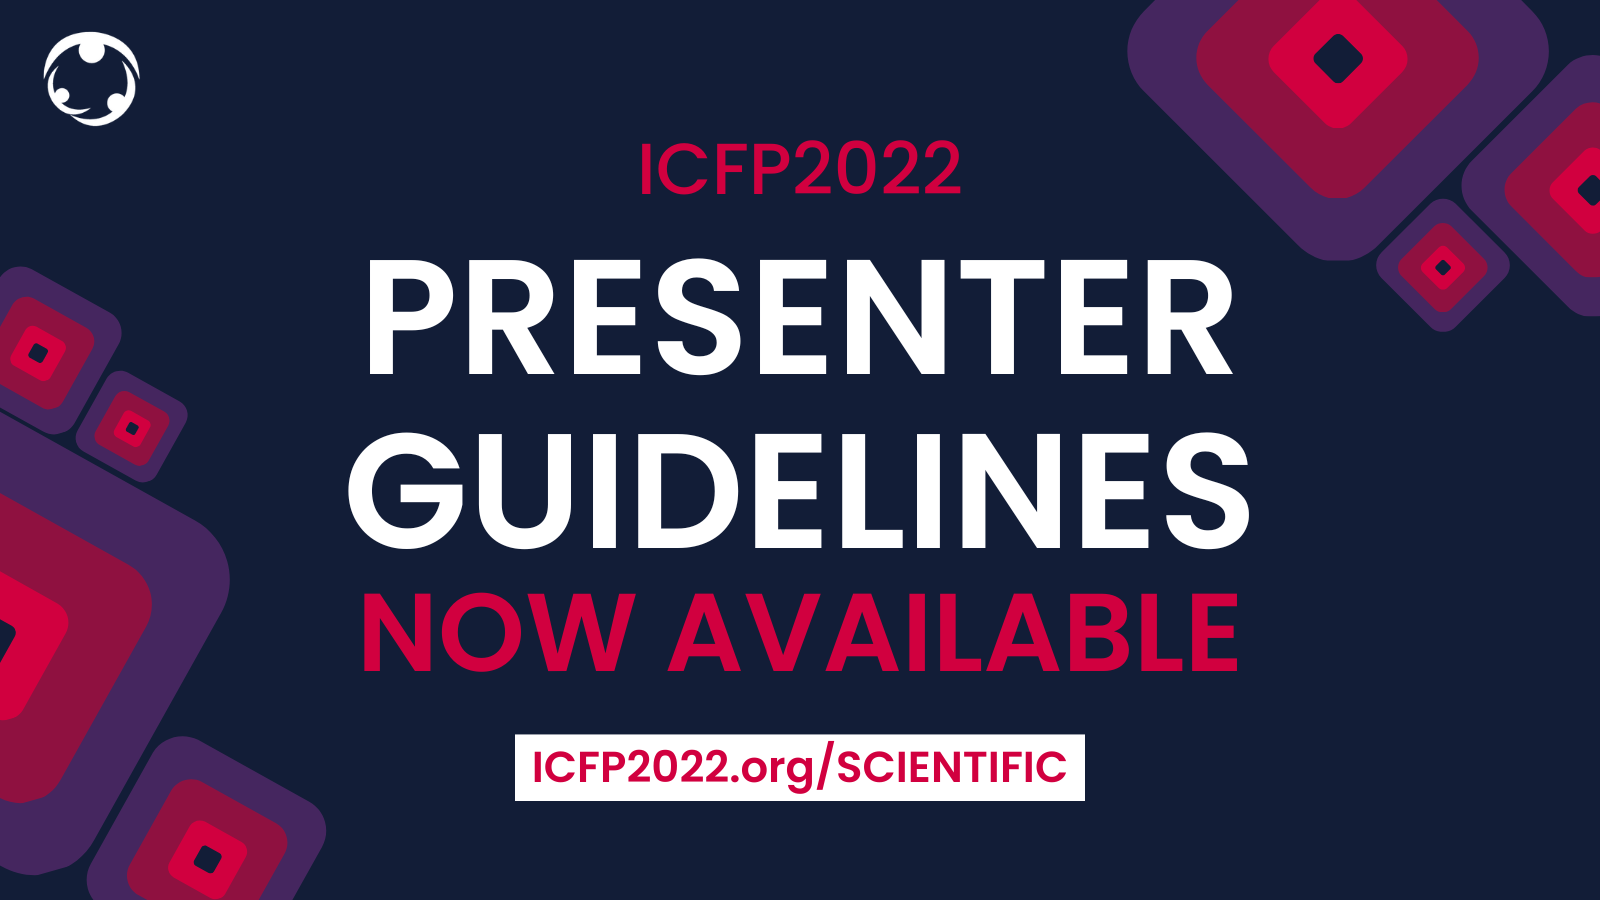 ICFP2022 Presenter Guidelines Now Available